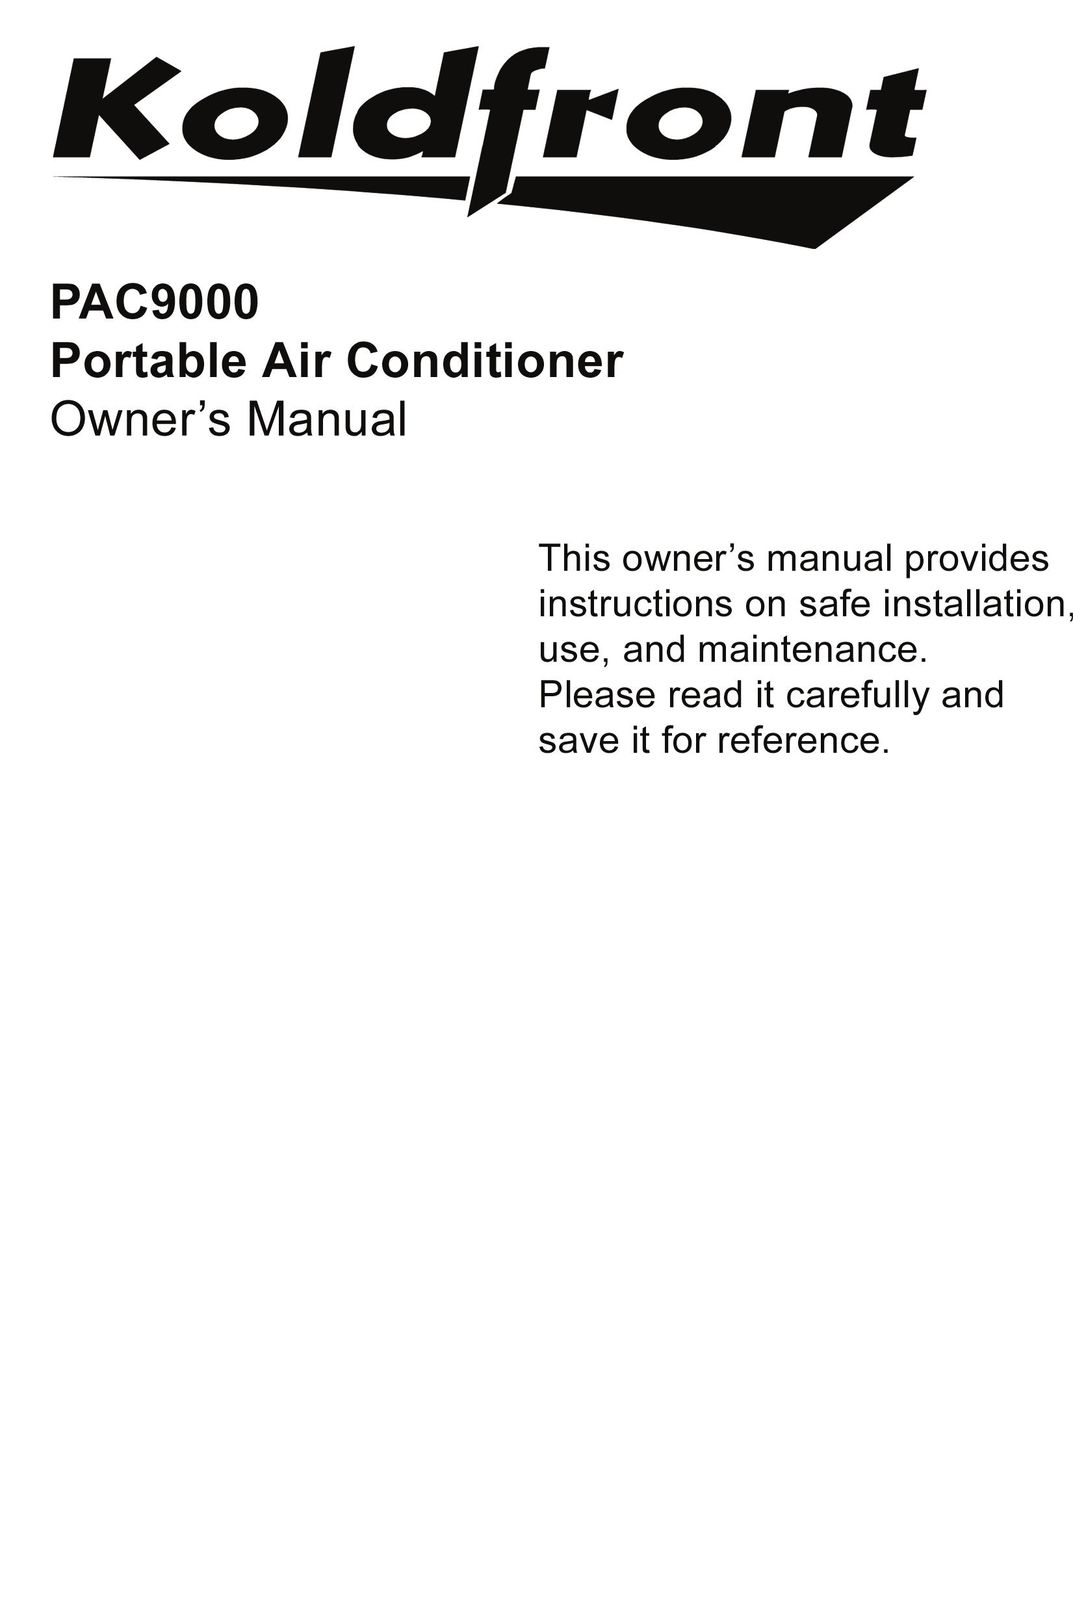 KoldFront PAC9000 Air Conditioner User Manual